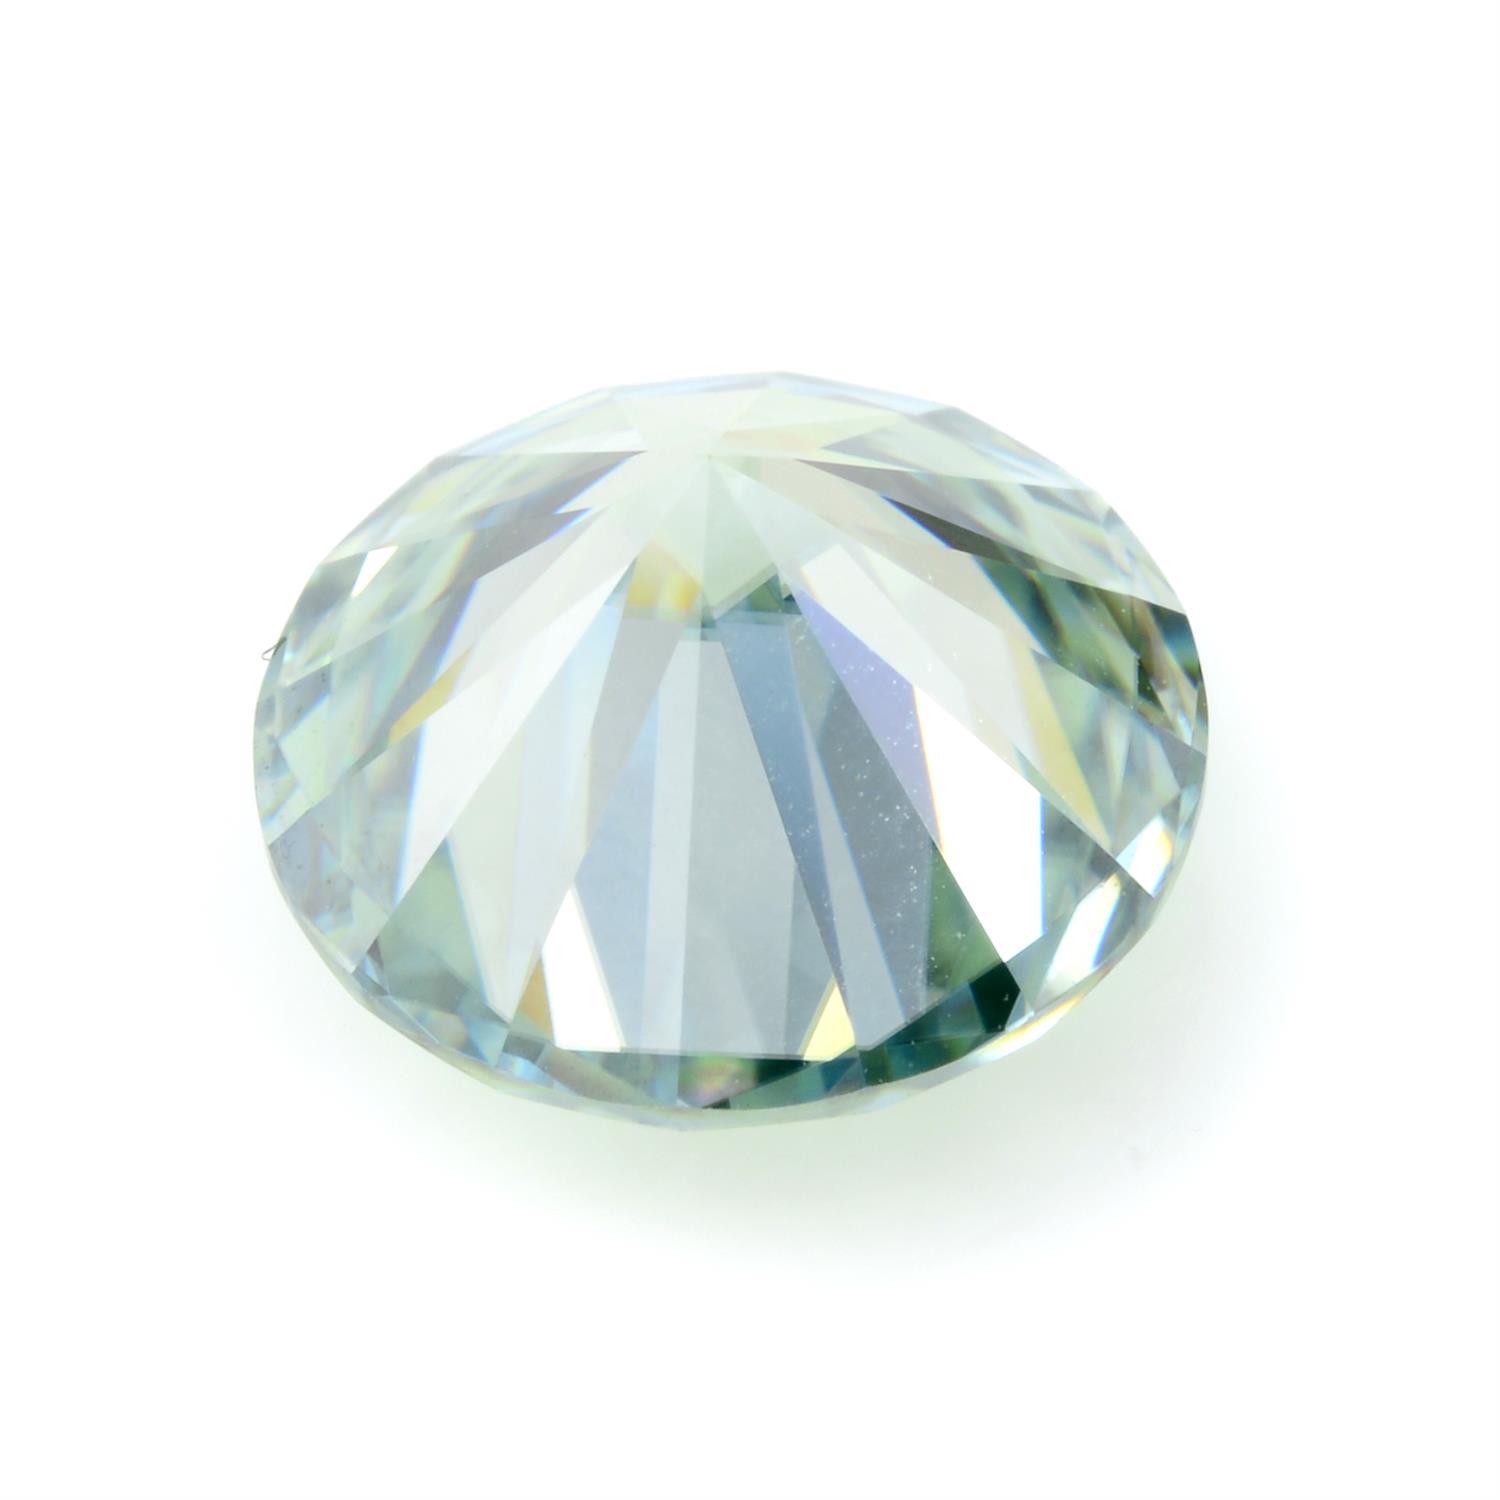 A circular shape synthetic moissanite, weighing 3.53ct - Image 2 of 2